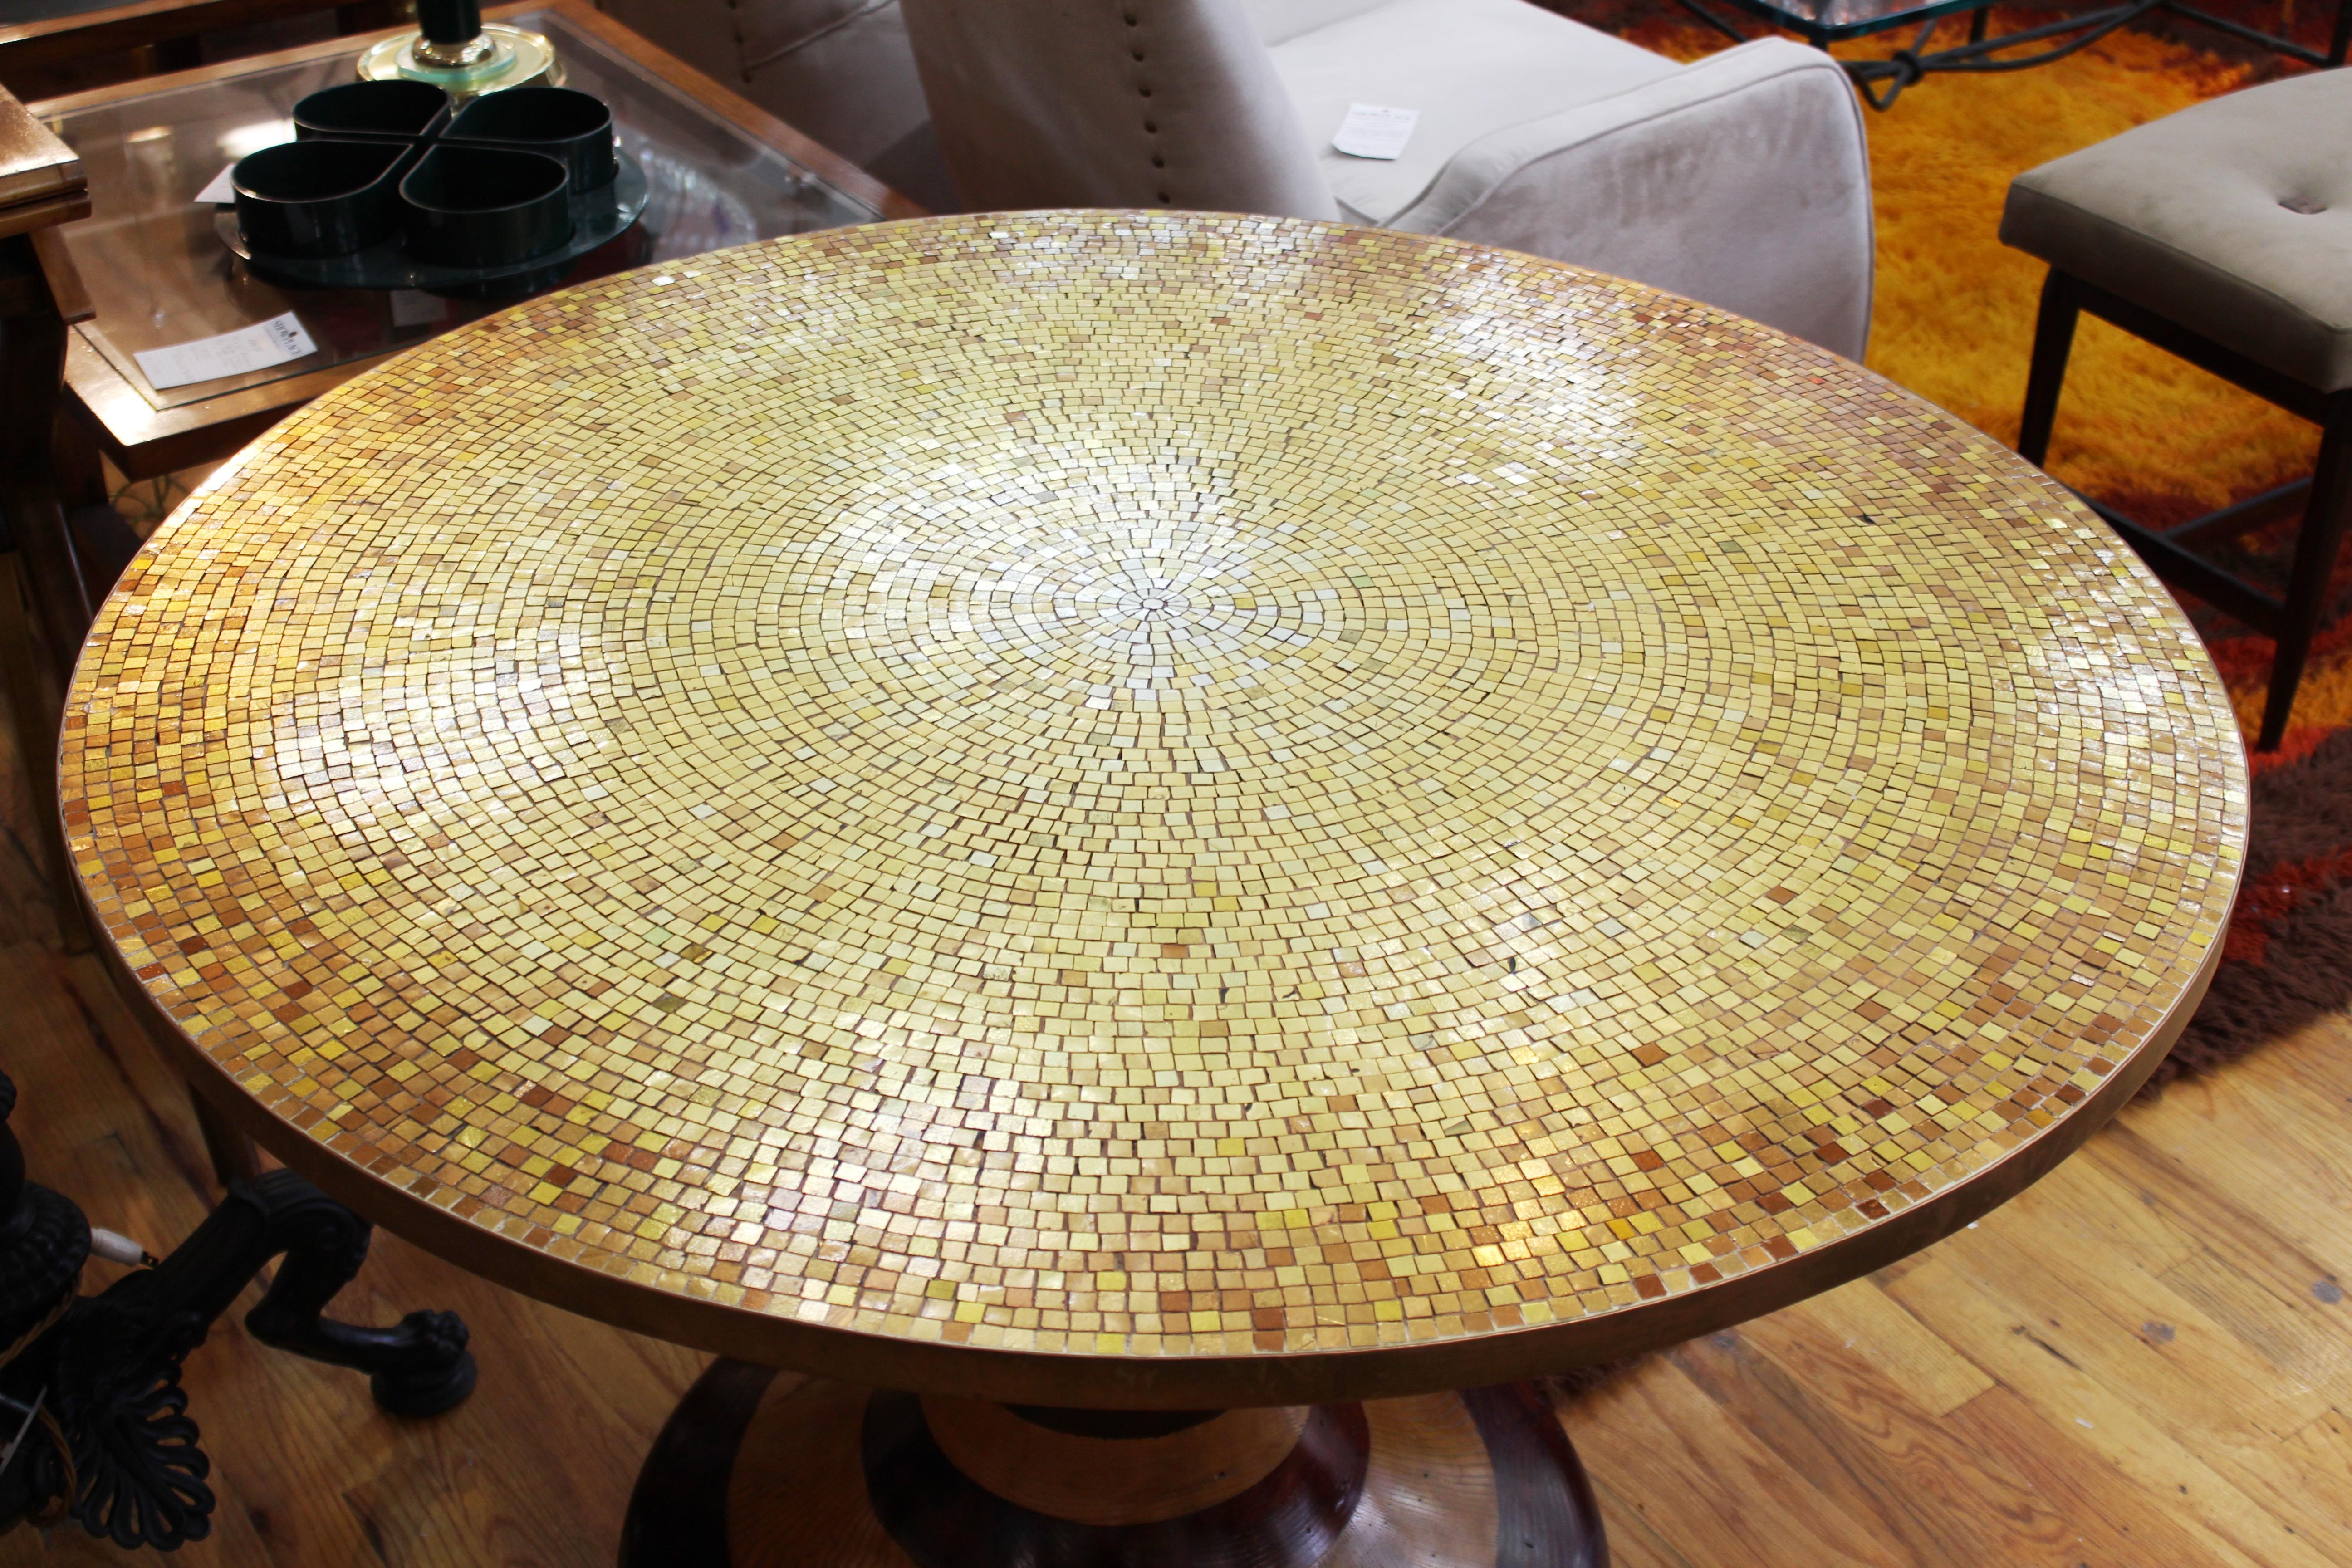 Wendell Castle style Mid-Century Modern center table or dining table with carved wood base and circular gold mosaic top. The piece is in great vintage condition with age-appropriate wear and use.